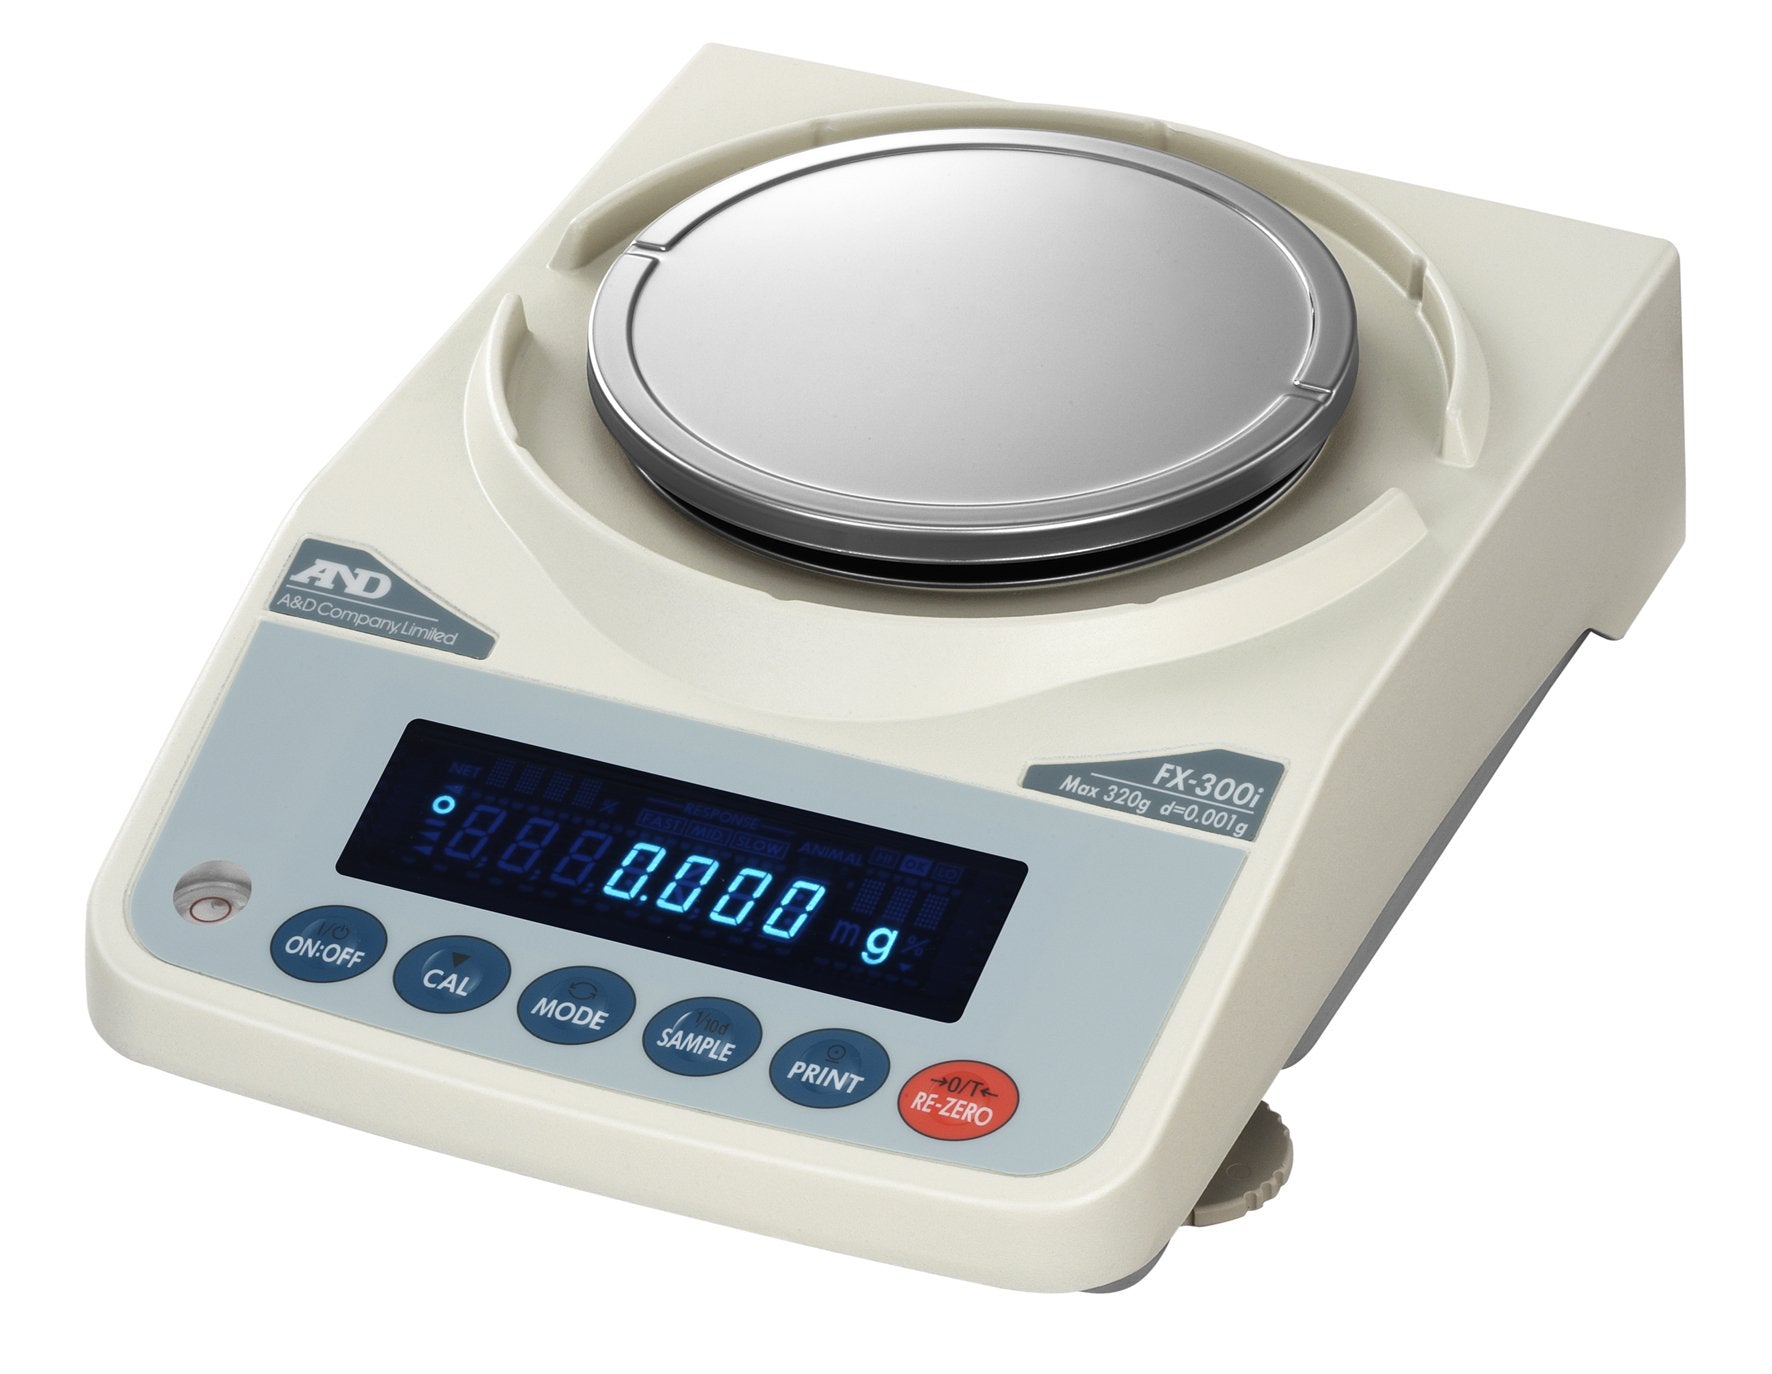 AND Weighing FX-300iNC Precision Balance